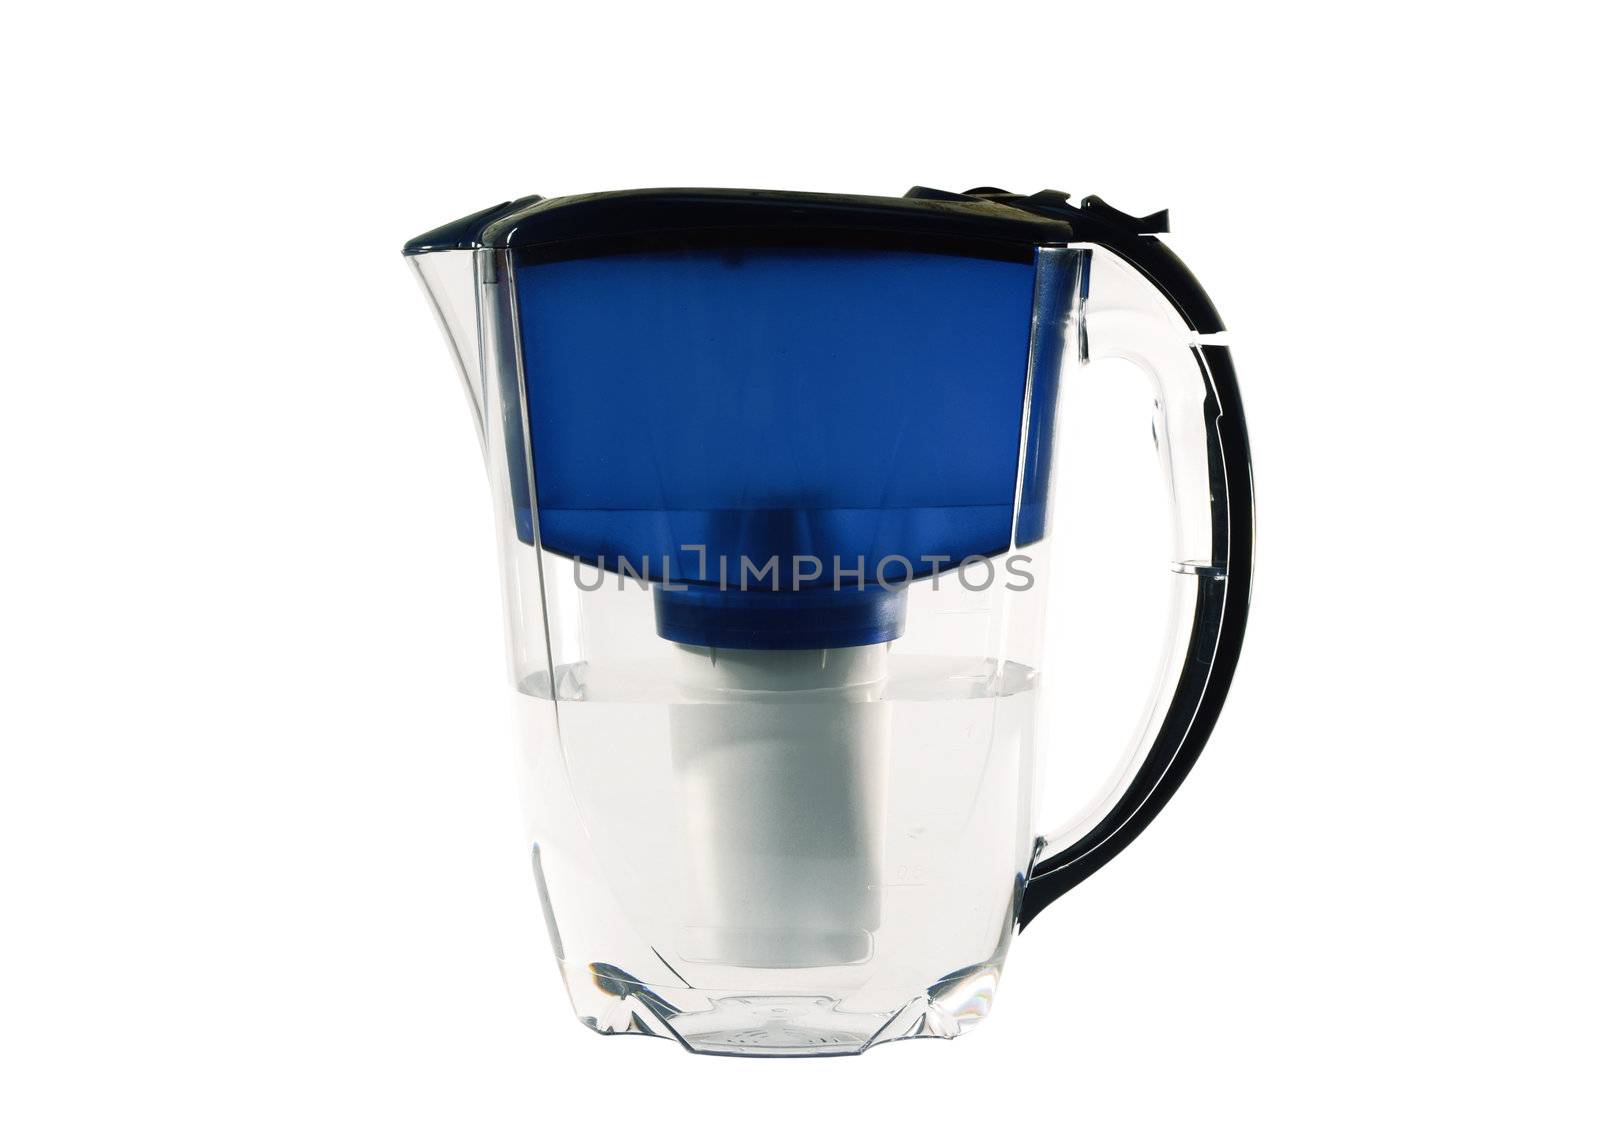 Clear water filter pitcher. Isolated on white background by Lexxizm